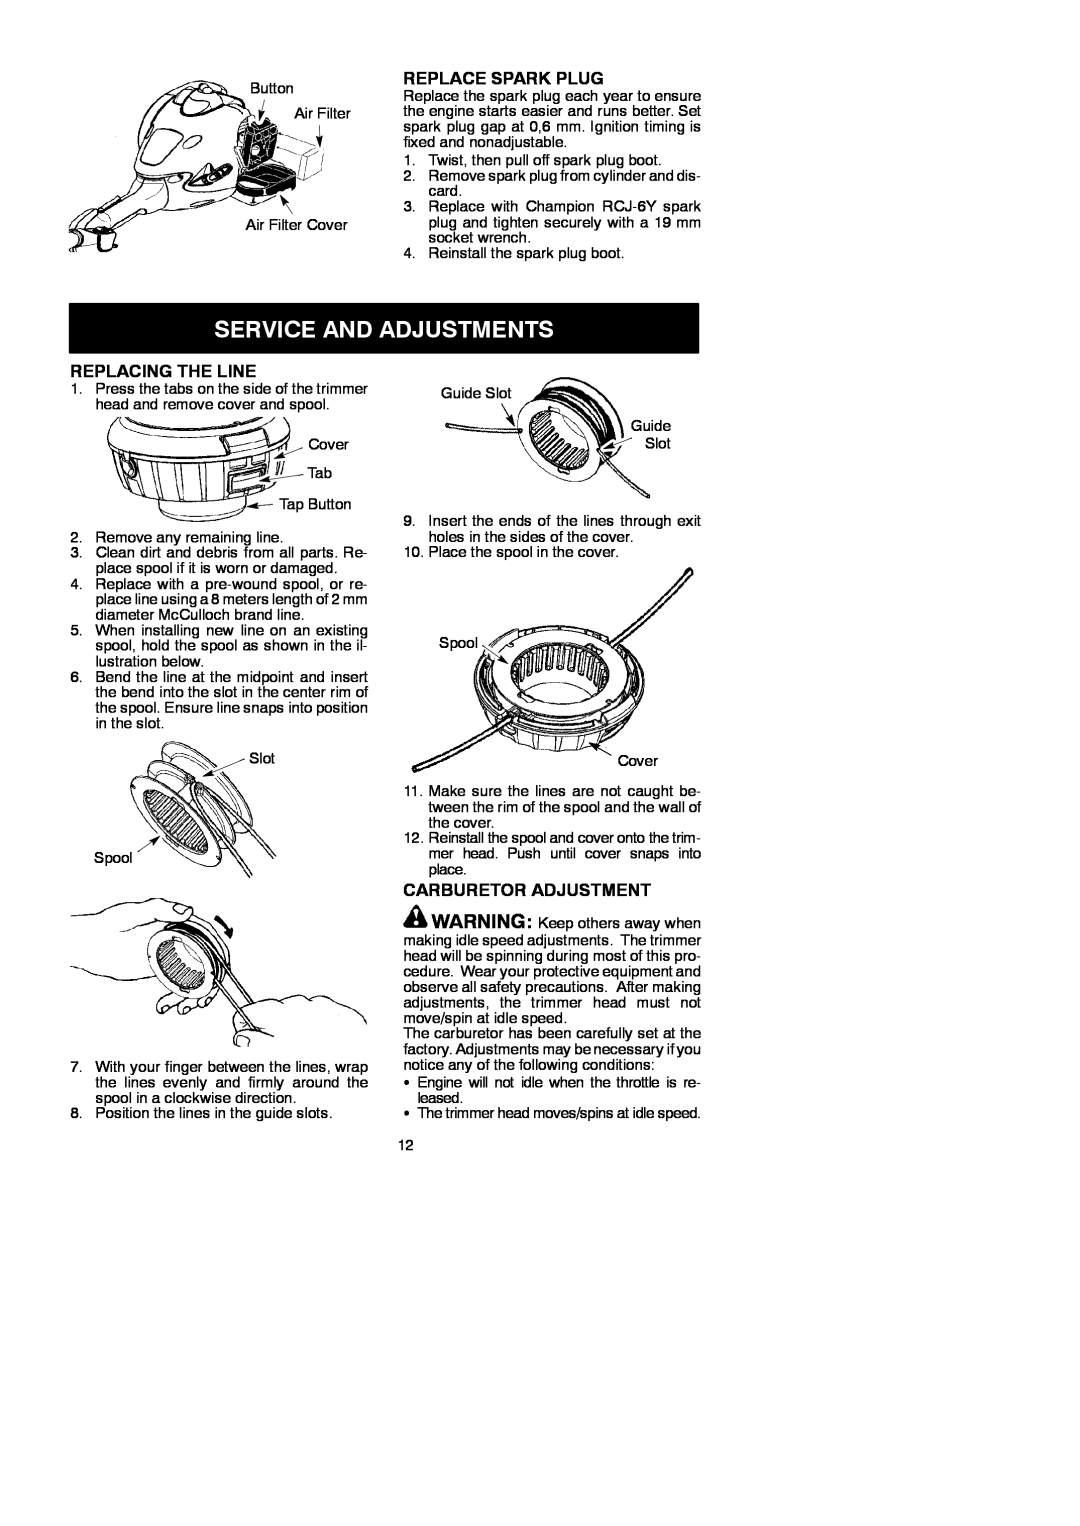 McCulloch 250CXL instruction manual Service And Adjustments, Replace Spark Plug, Replacing The Line, Carburetor Adjustment 